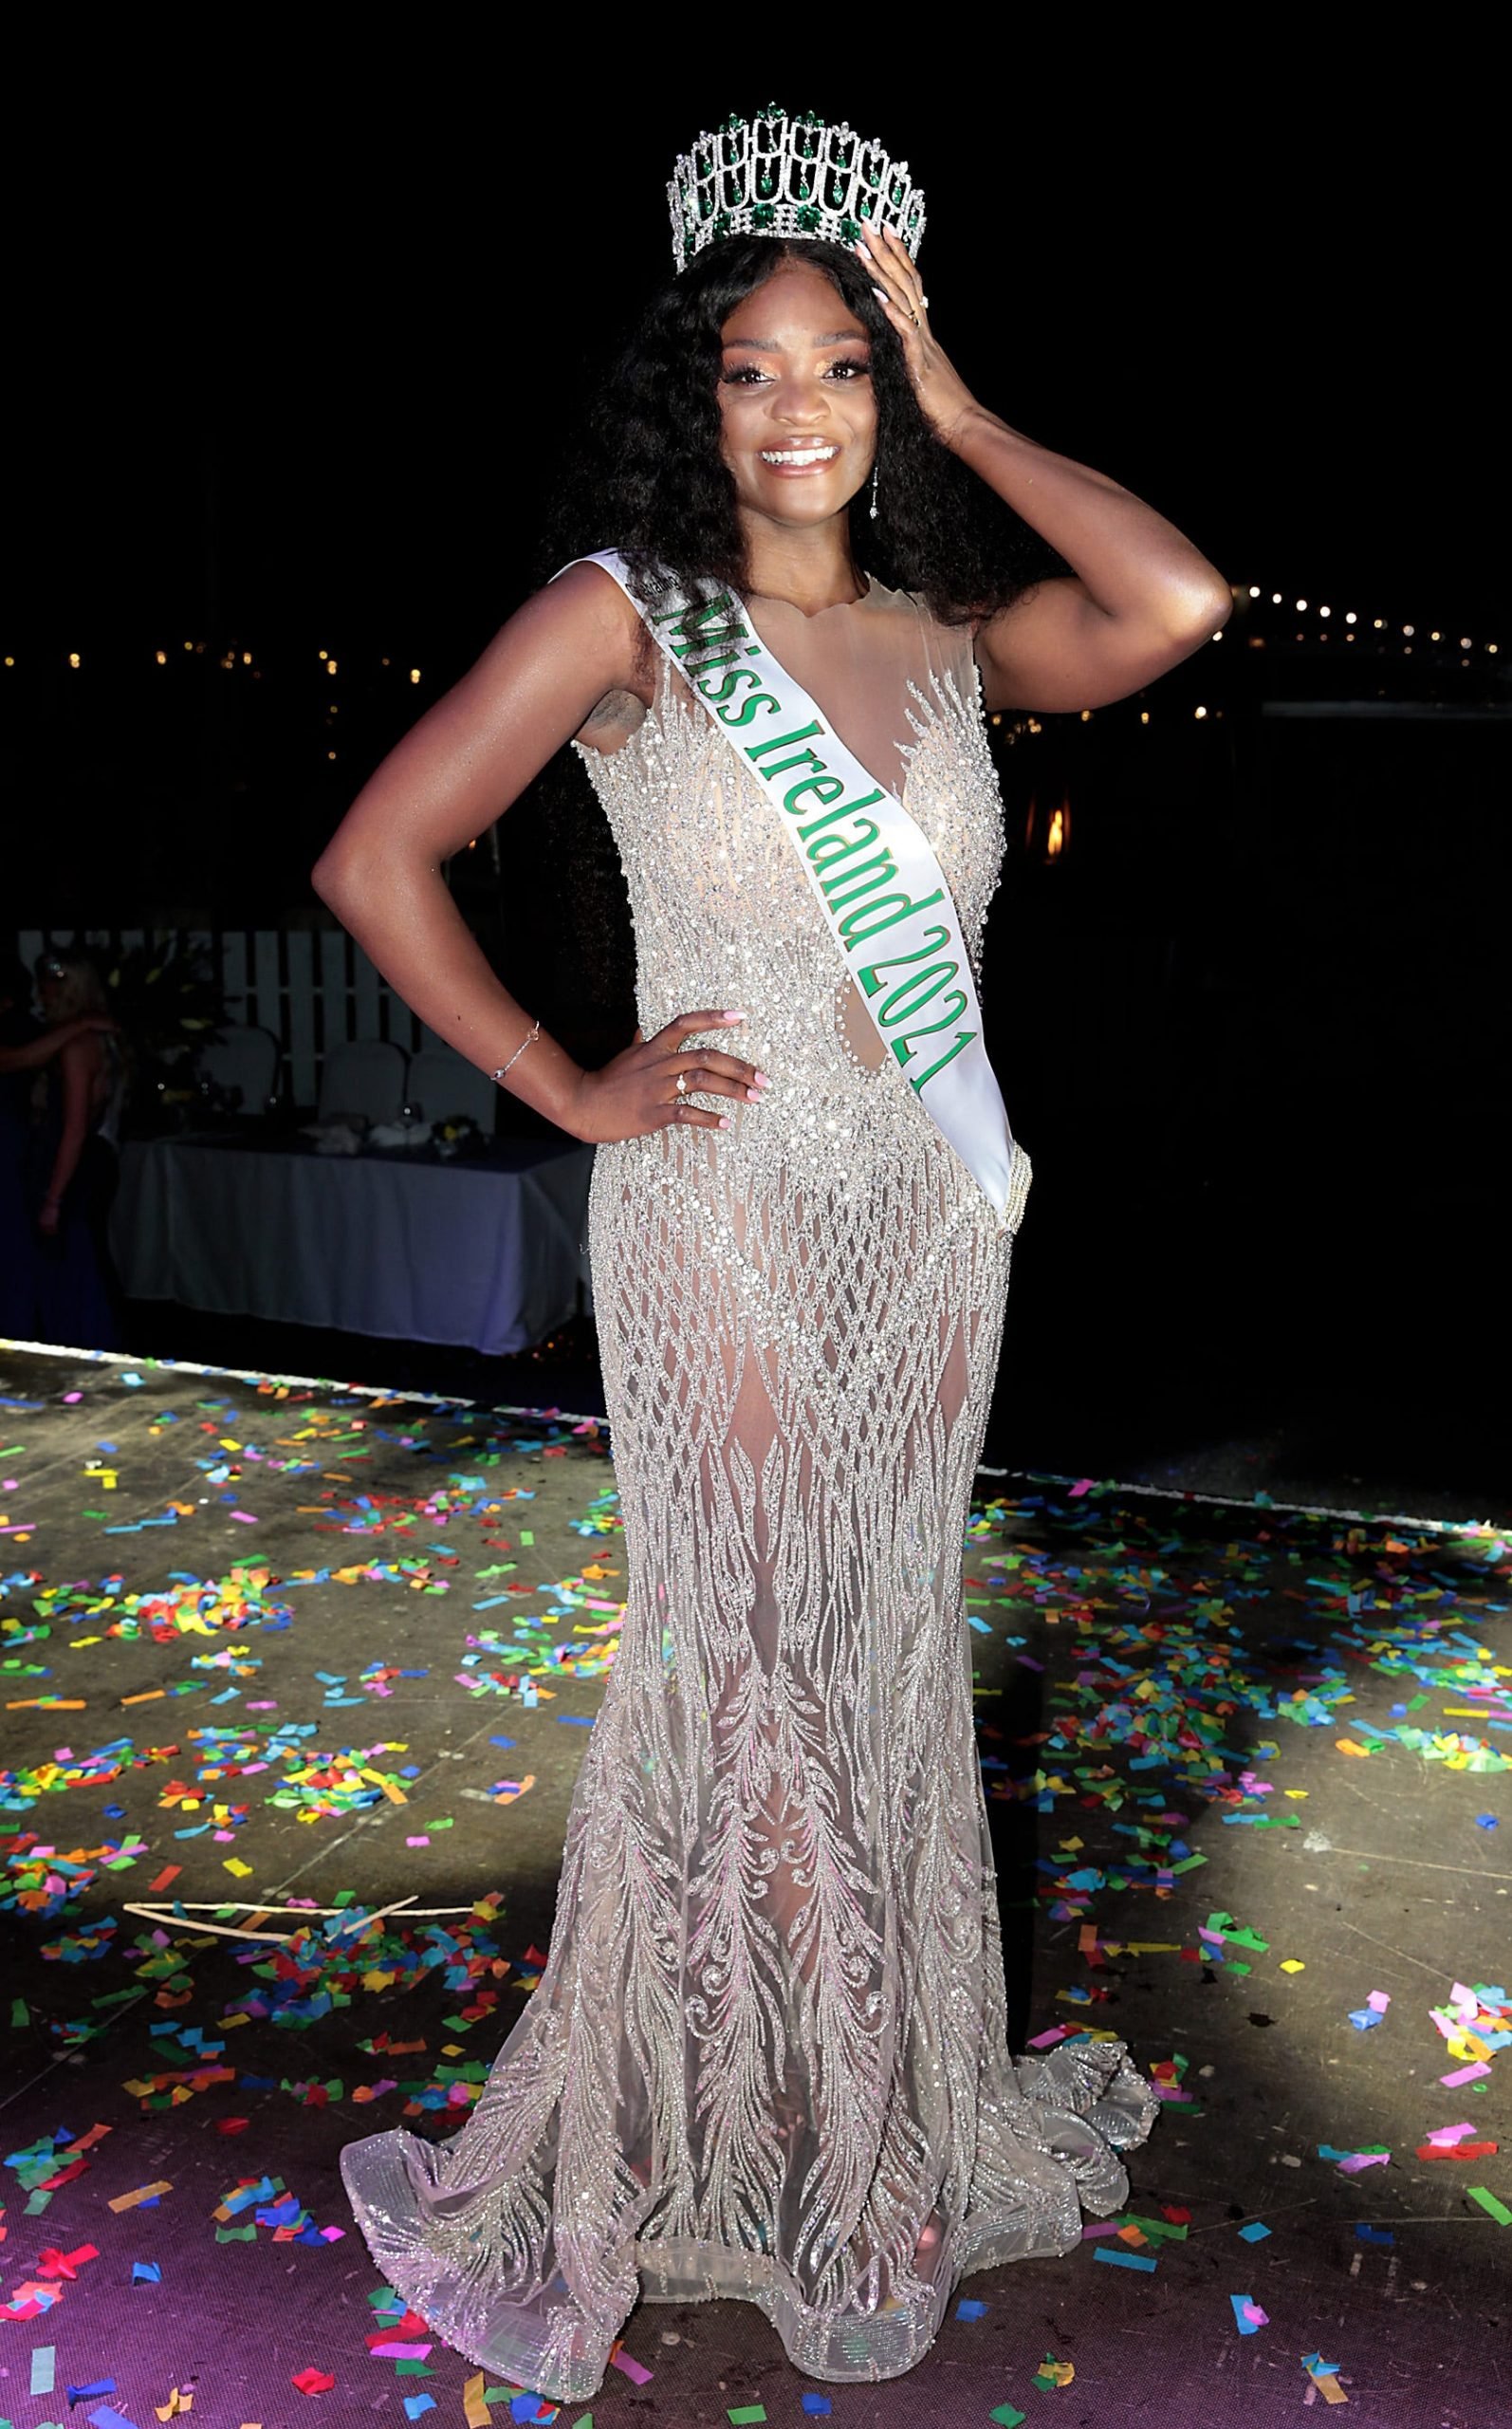 A Black woman was crowned Miss Ireland for the first time in the pageant's 74-year history